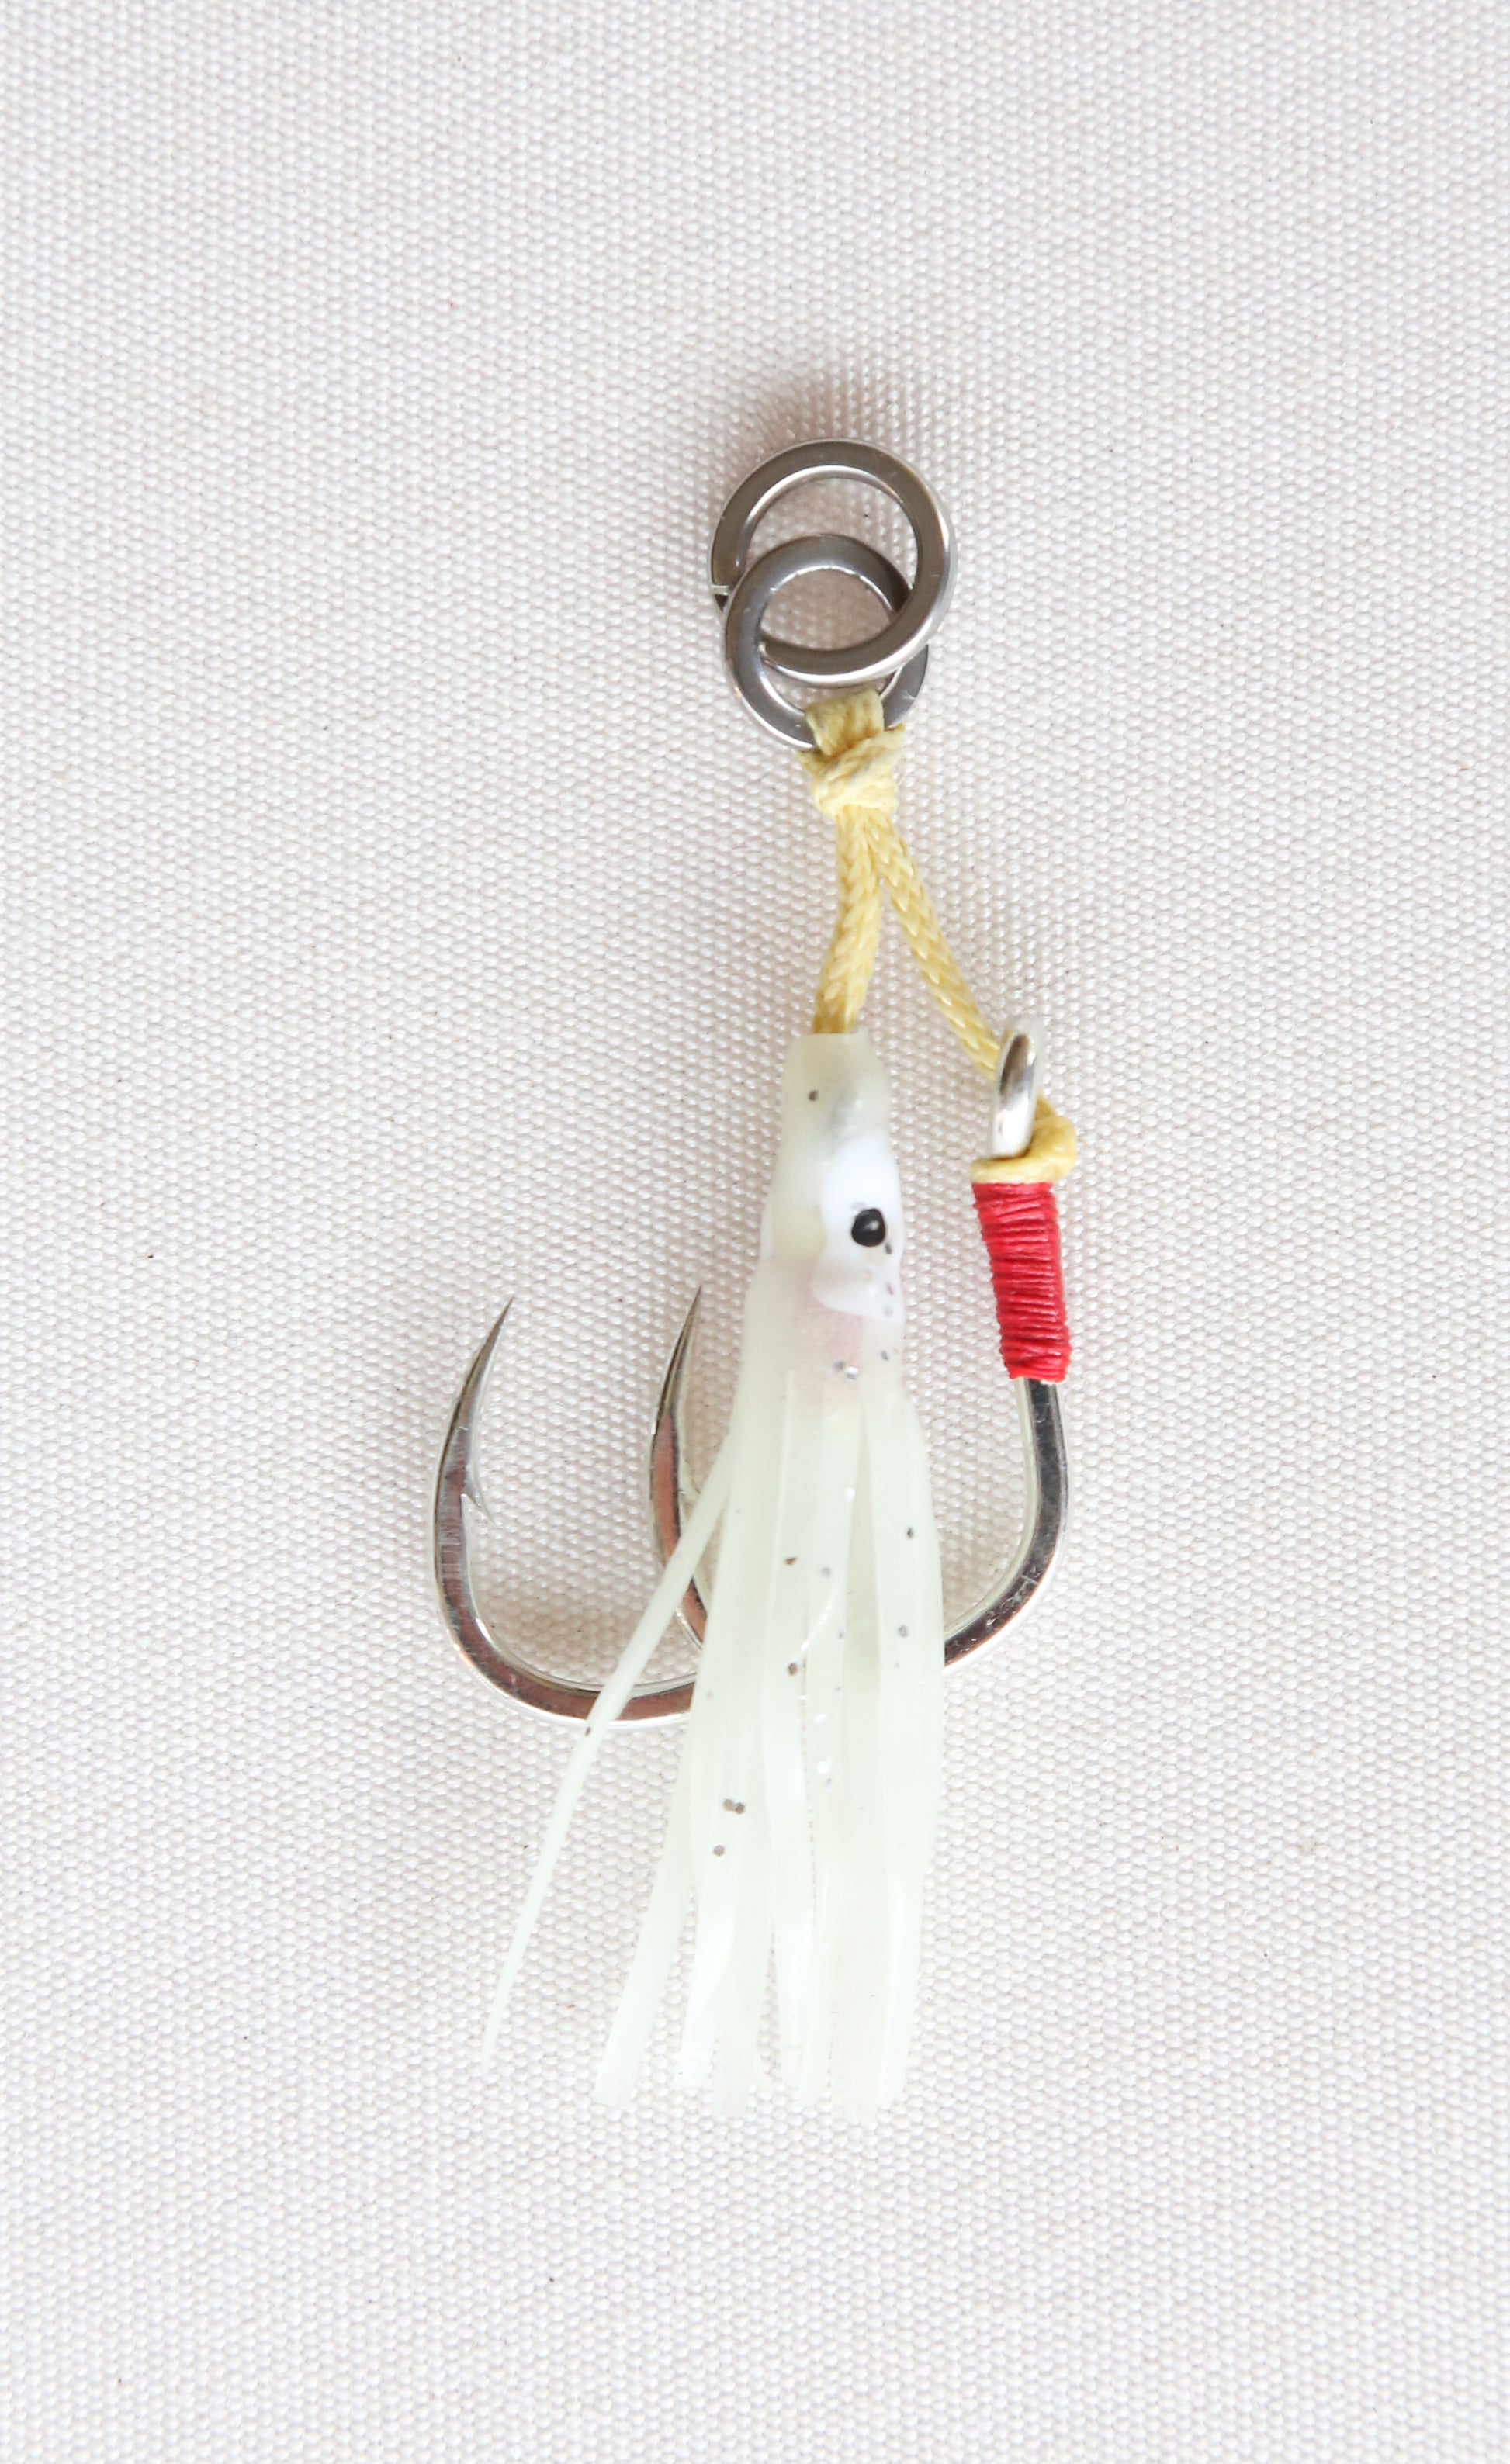 How to Rig Jigging Assist Hooks 